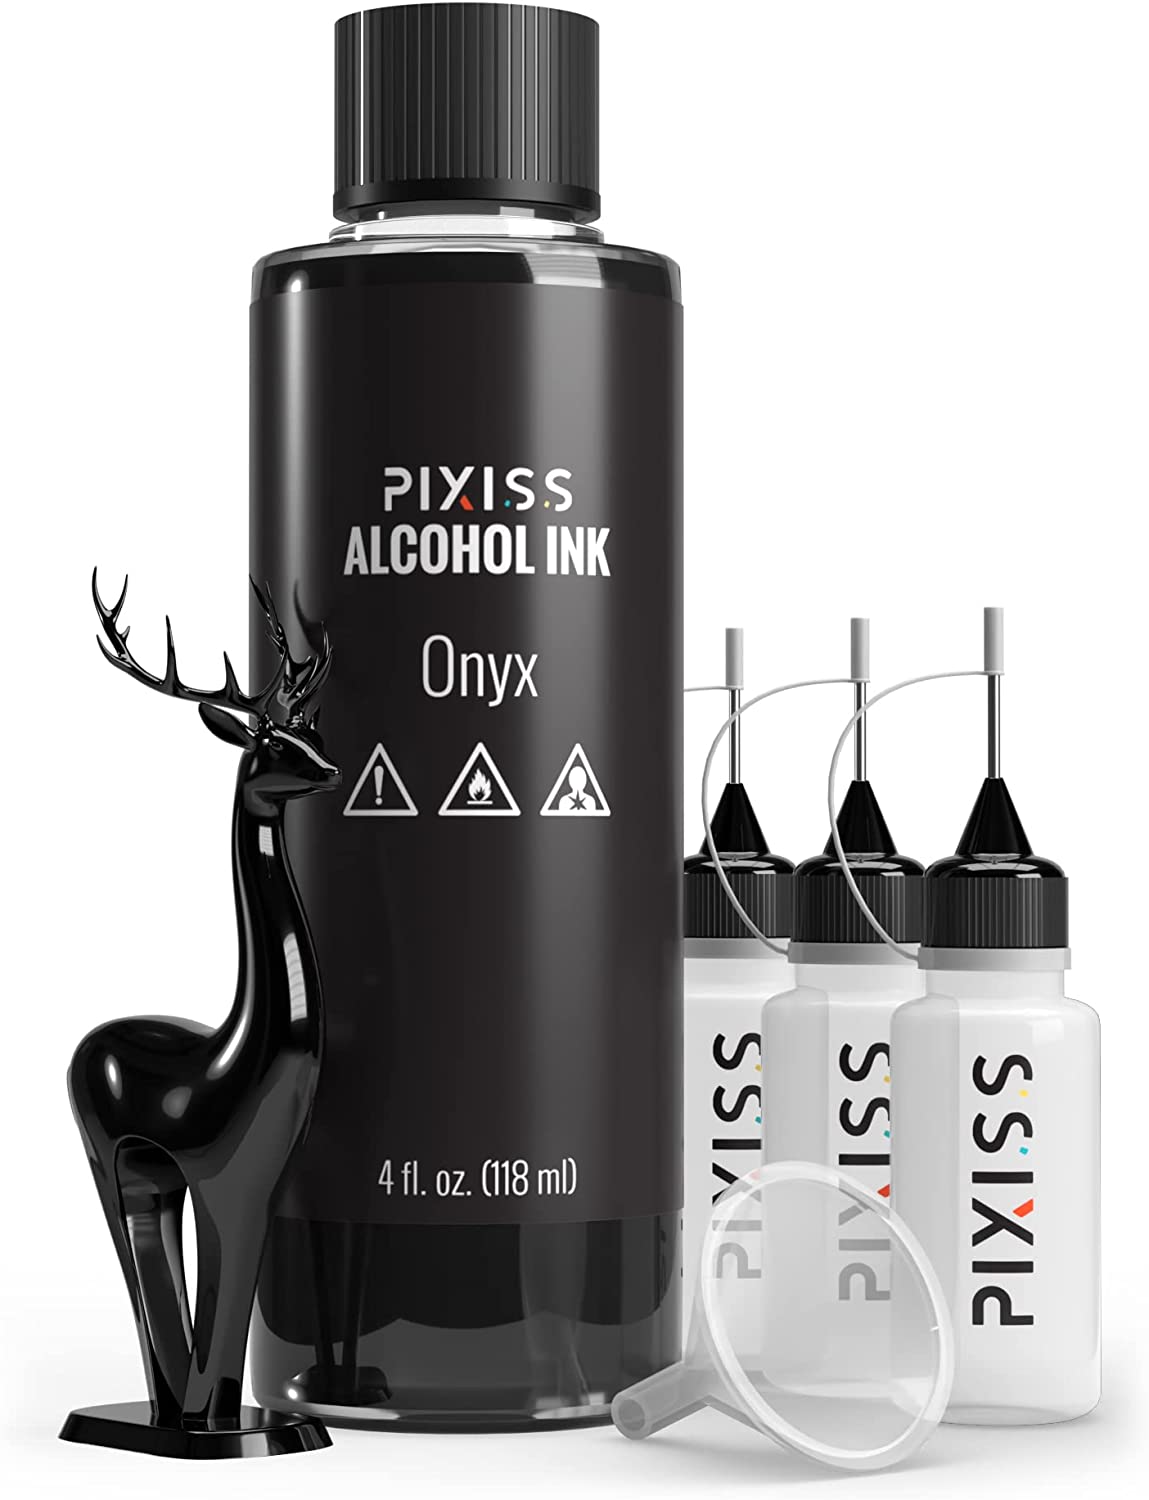 Pixiss Black Onyx Alcohol Ink for Resin 4oz, 3 Pixiss Applicator Bottles and Funnel